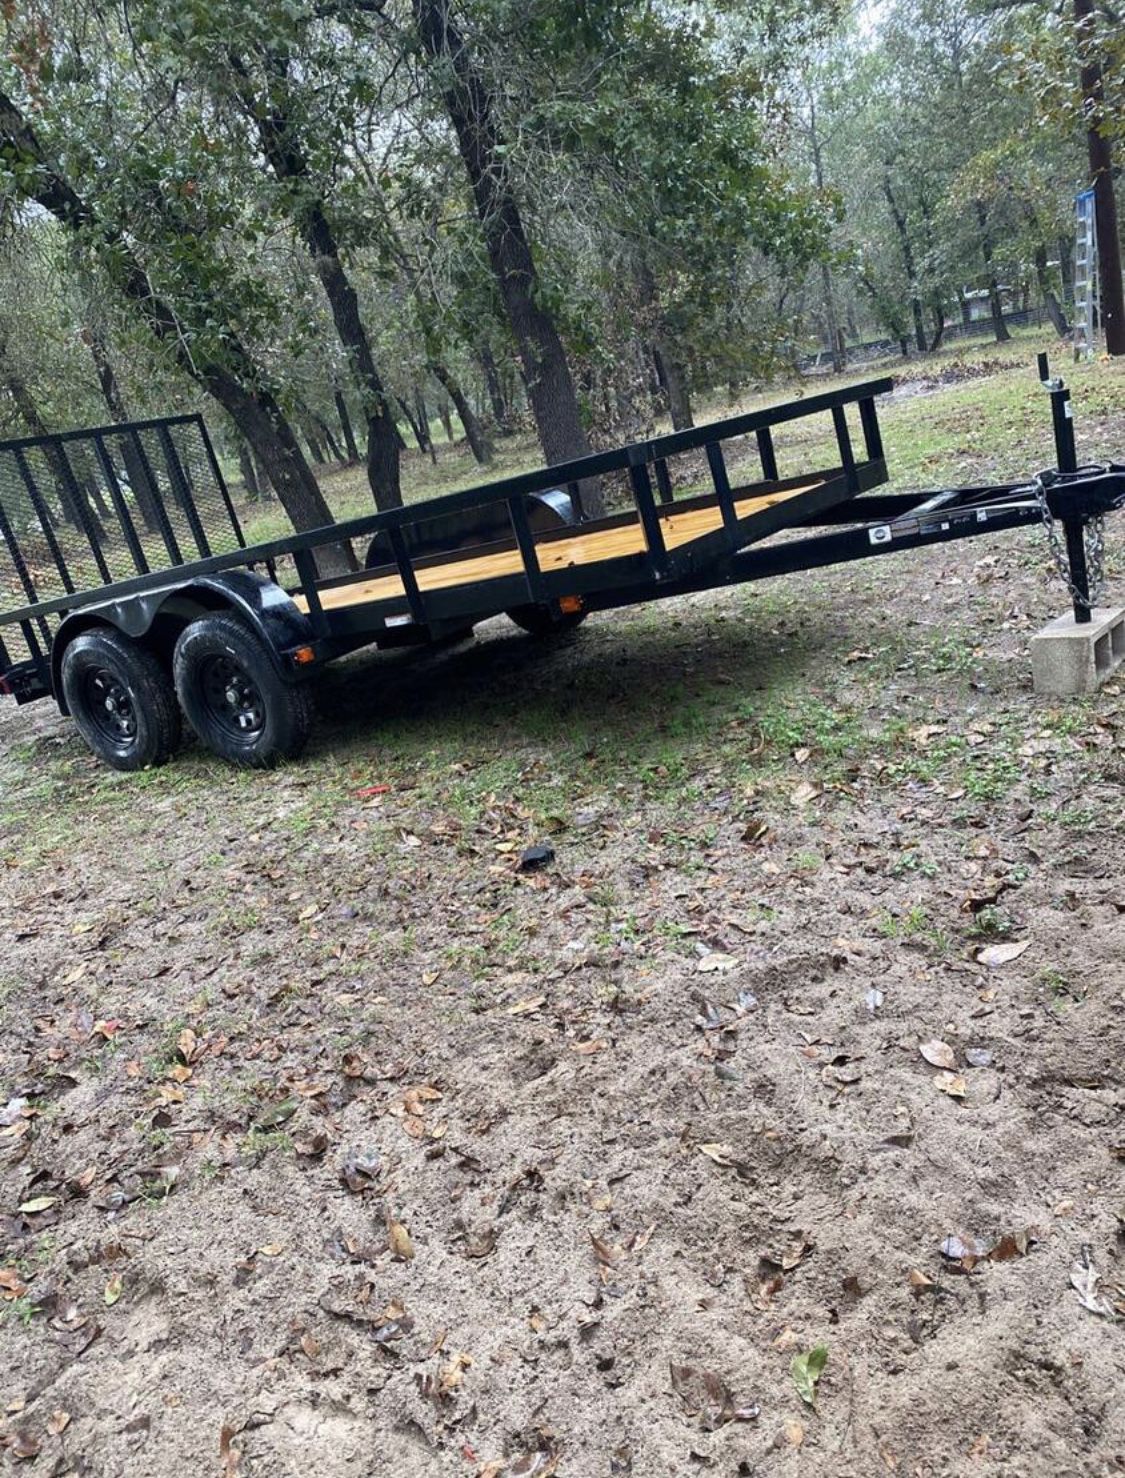 For Sale  Utility trailer 6ftx14ft $3500